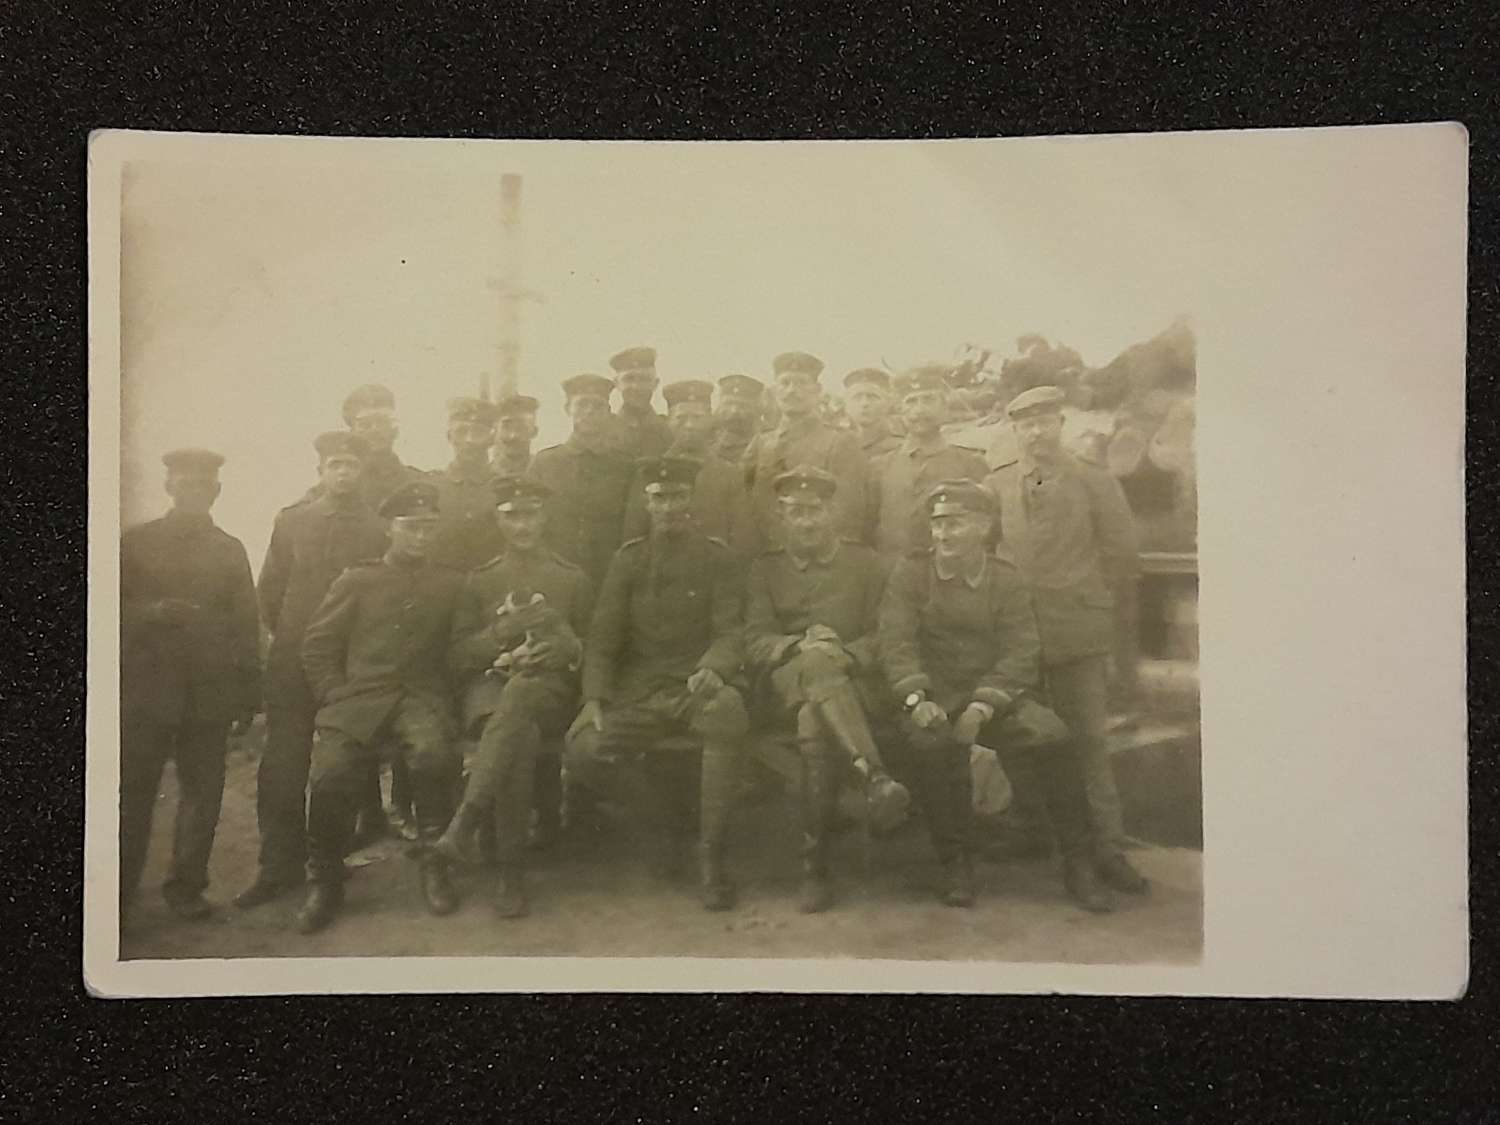 1917 posted Group Photo of German Soldiers